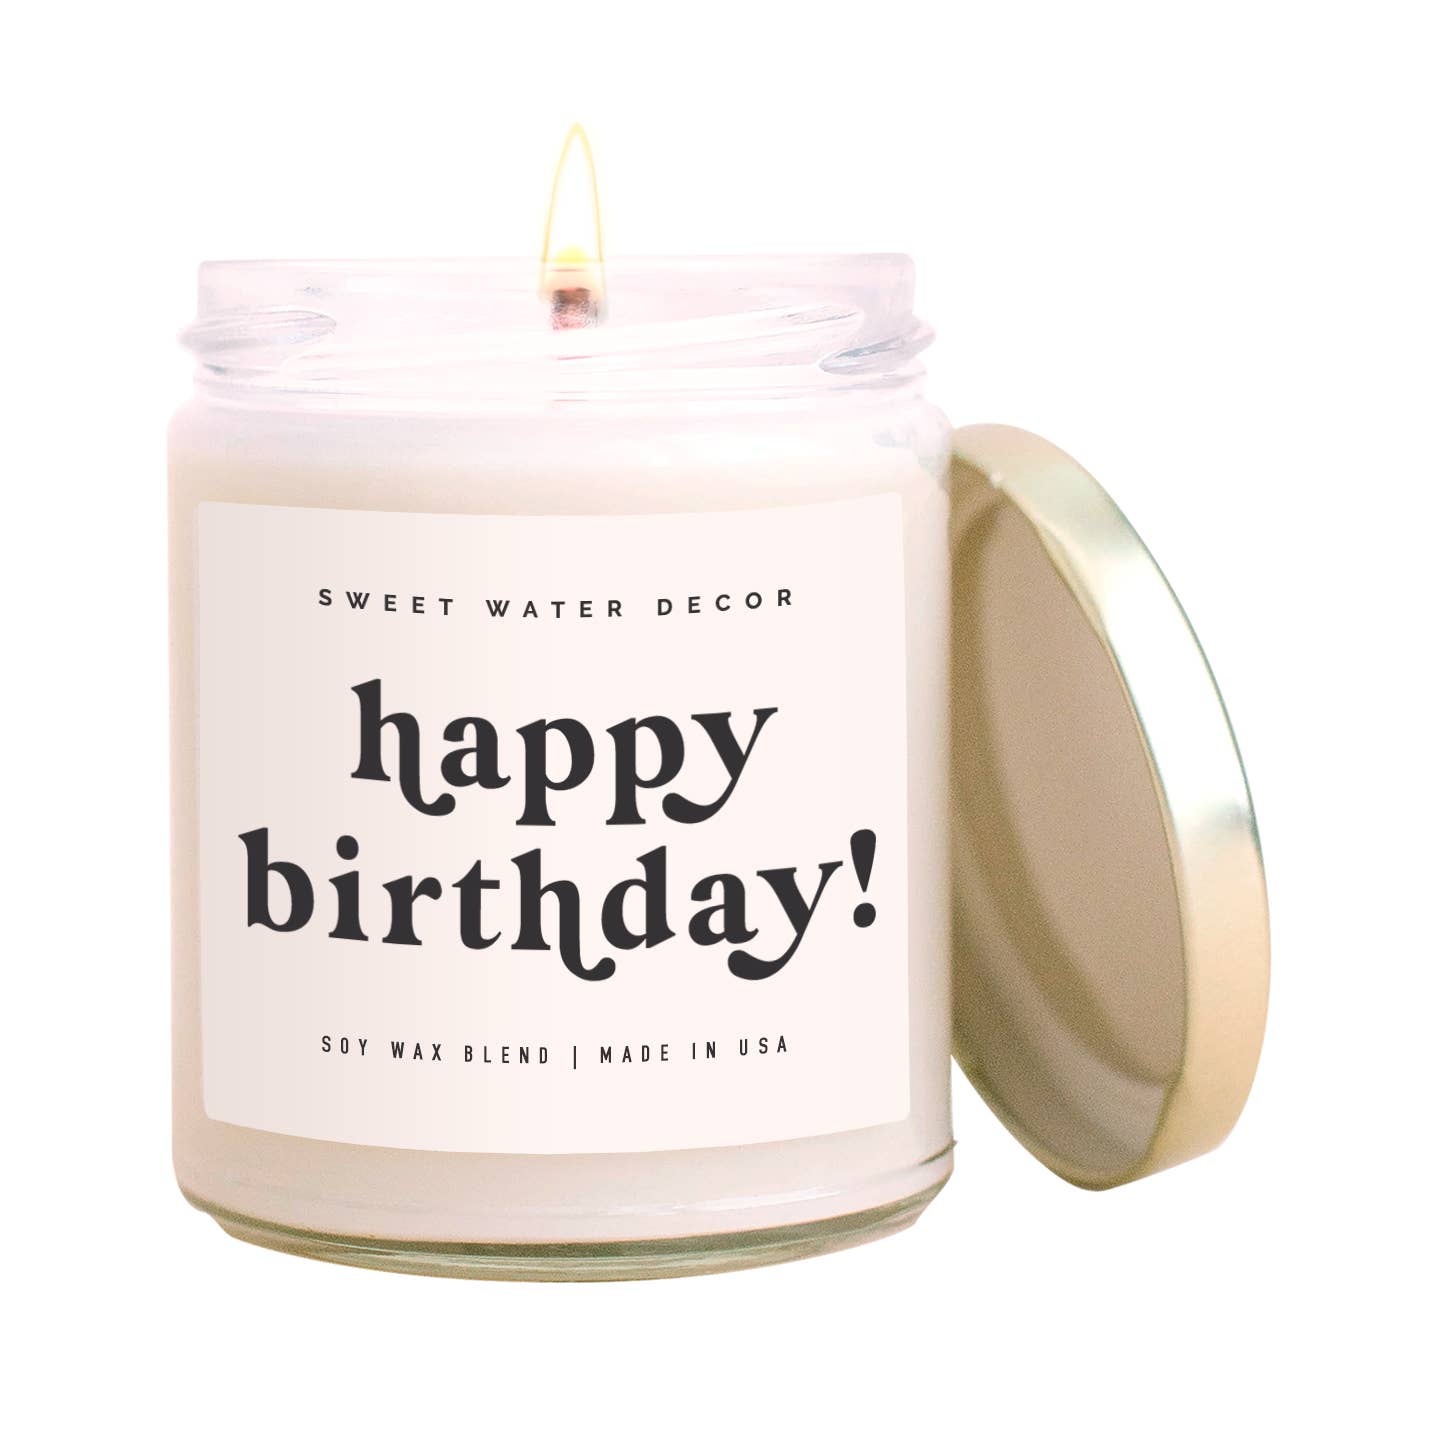 Sweet Water Decor - Happy Birthday 9 oz Soy Candle - Home Decor & Gifts